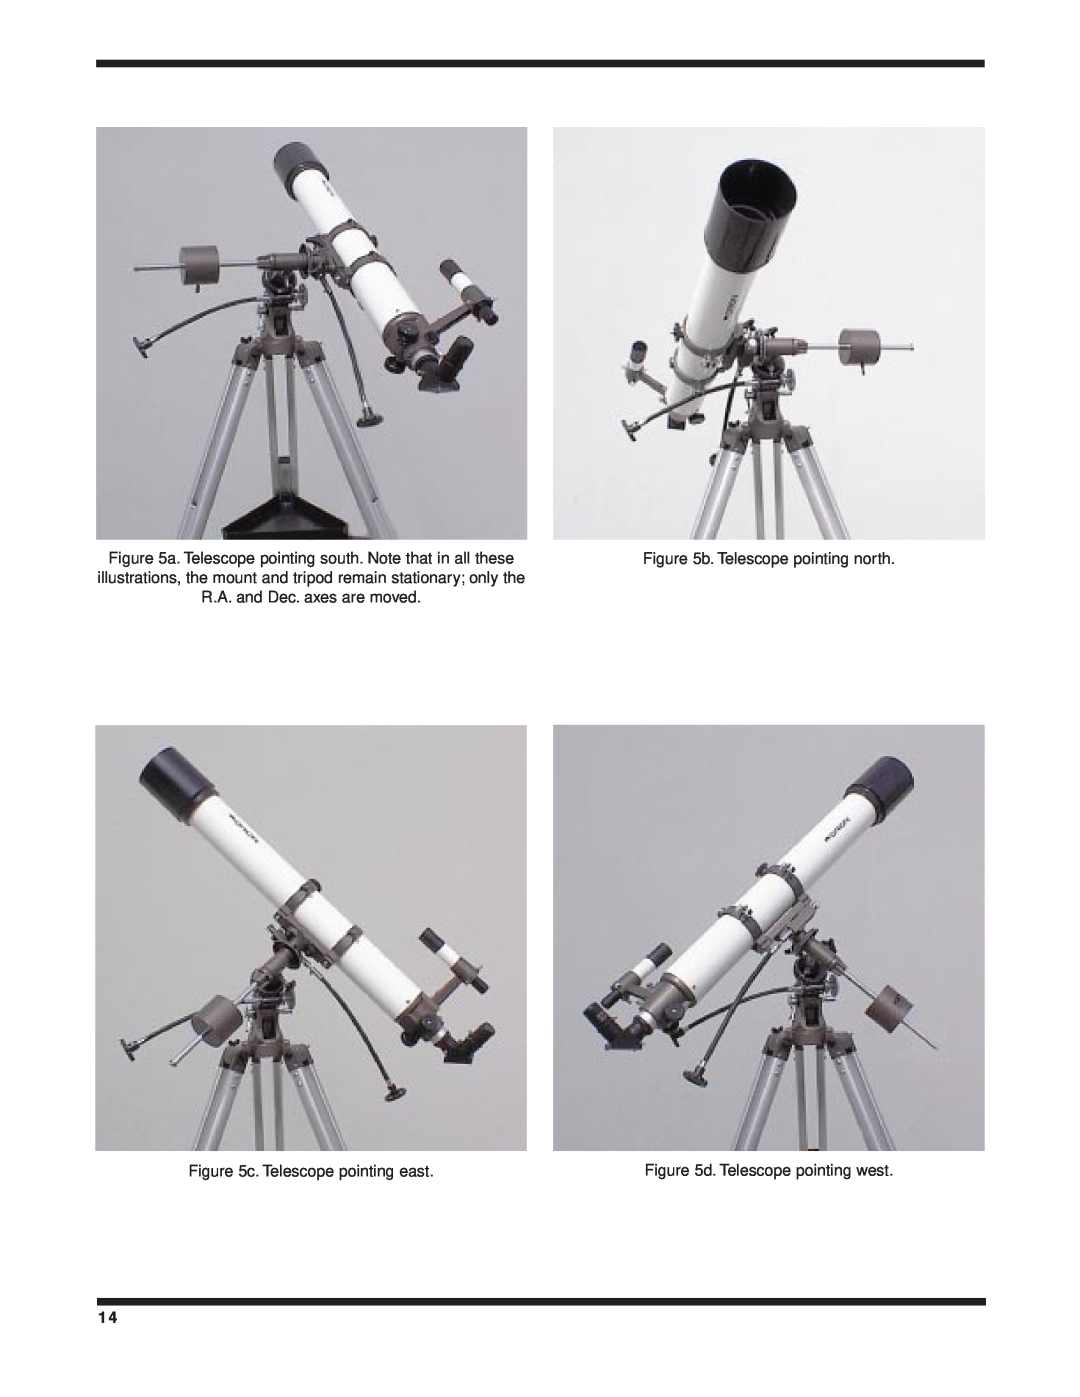 Orion 9024 b. Telescope pointing north, c. Telescope pointing east, a. Telescope pointing south. Note that in all these 